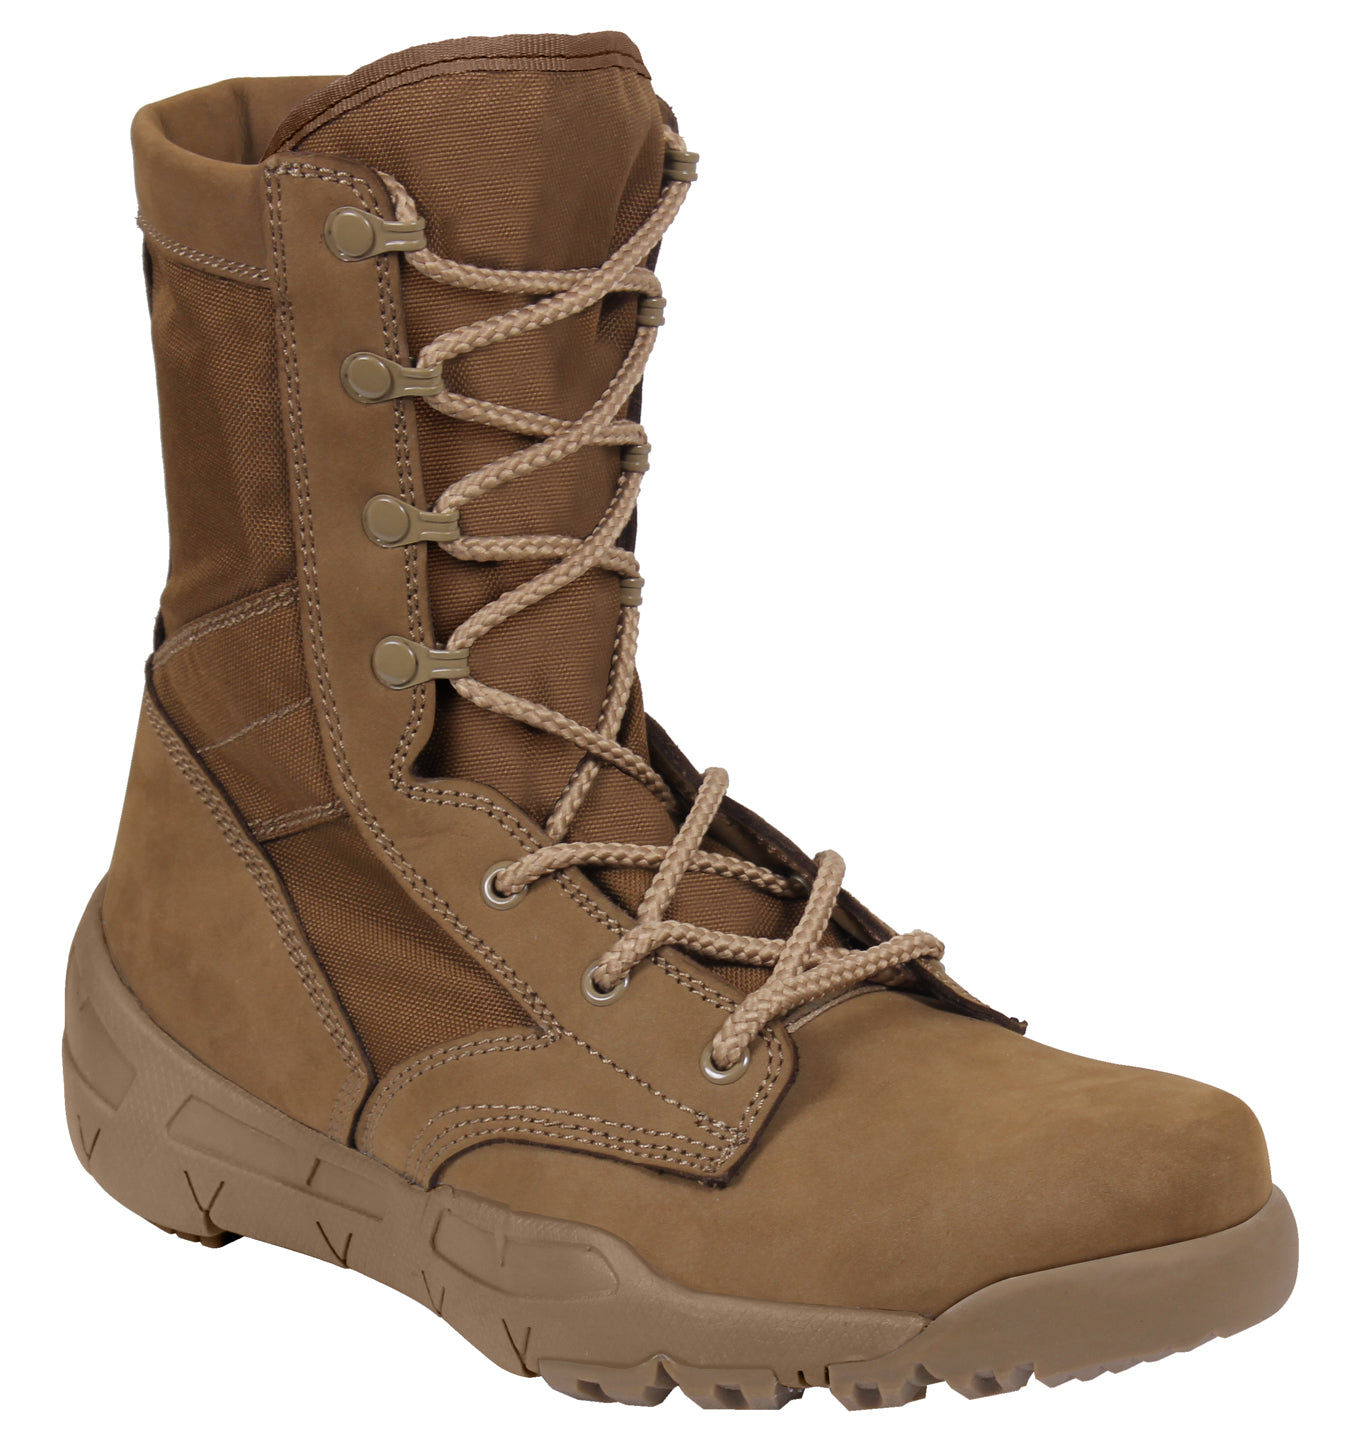 [AR 670-1] V-Max Lightweight Tactical Boots Coyote Brown AR 670-1